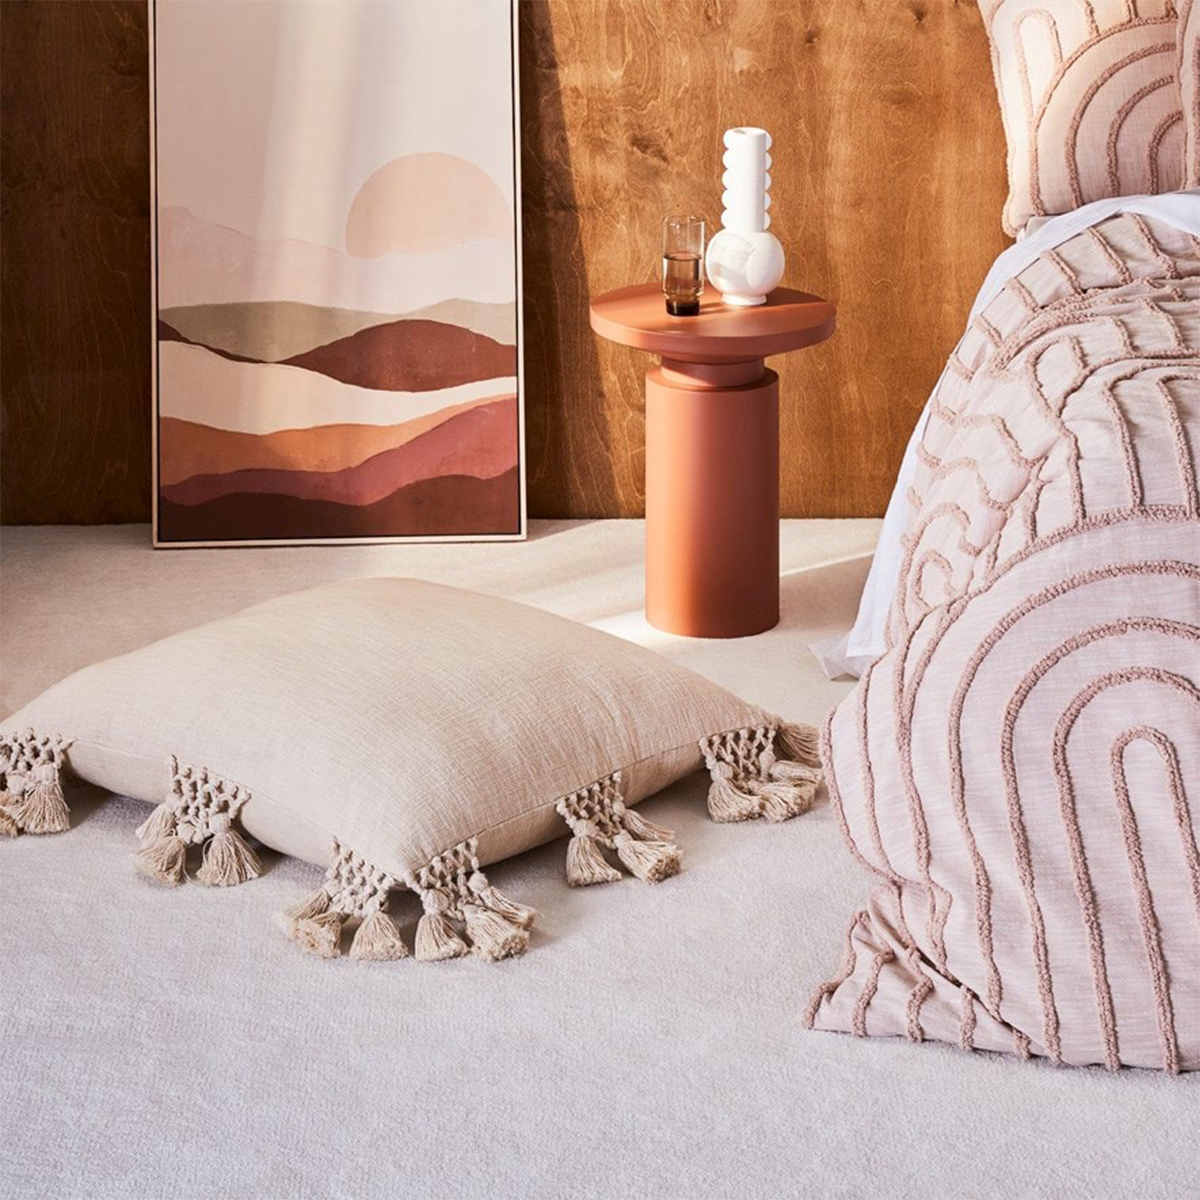 a bed, bedside table and a painting all in shades of dusty pink